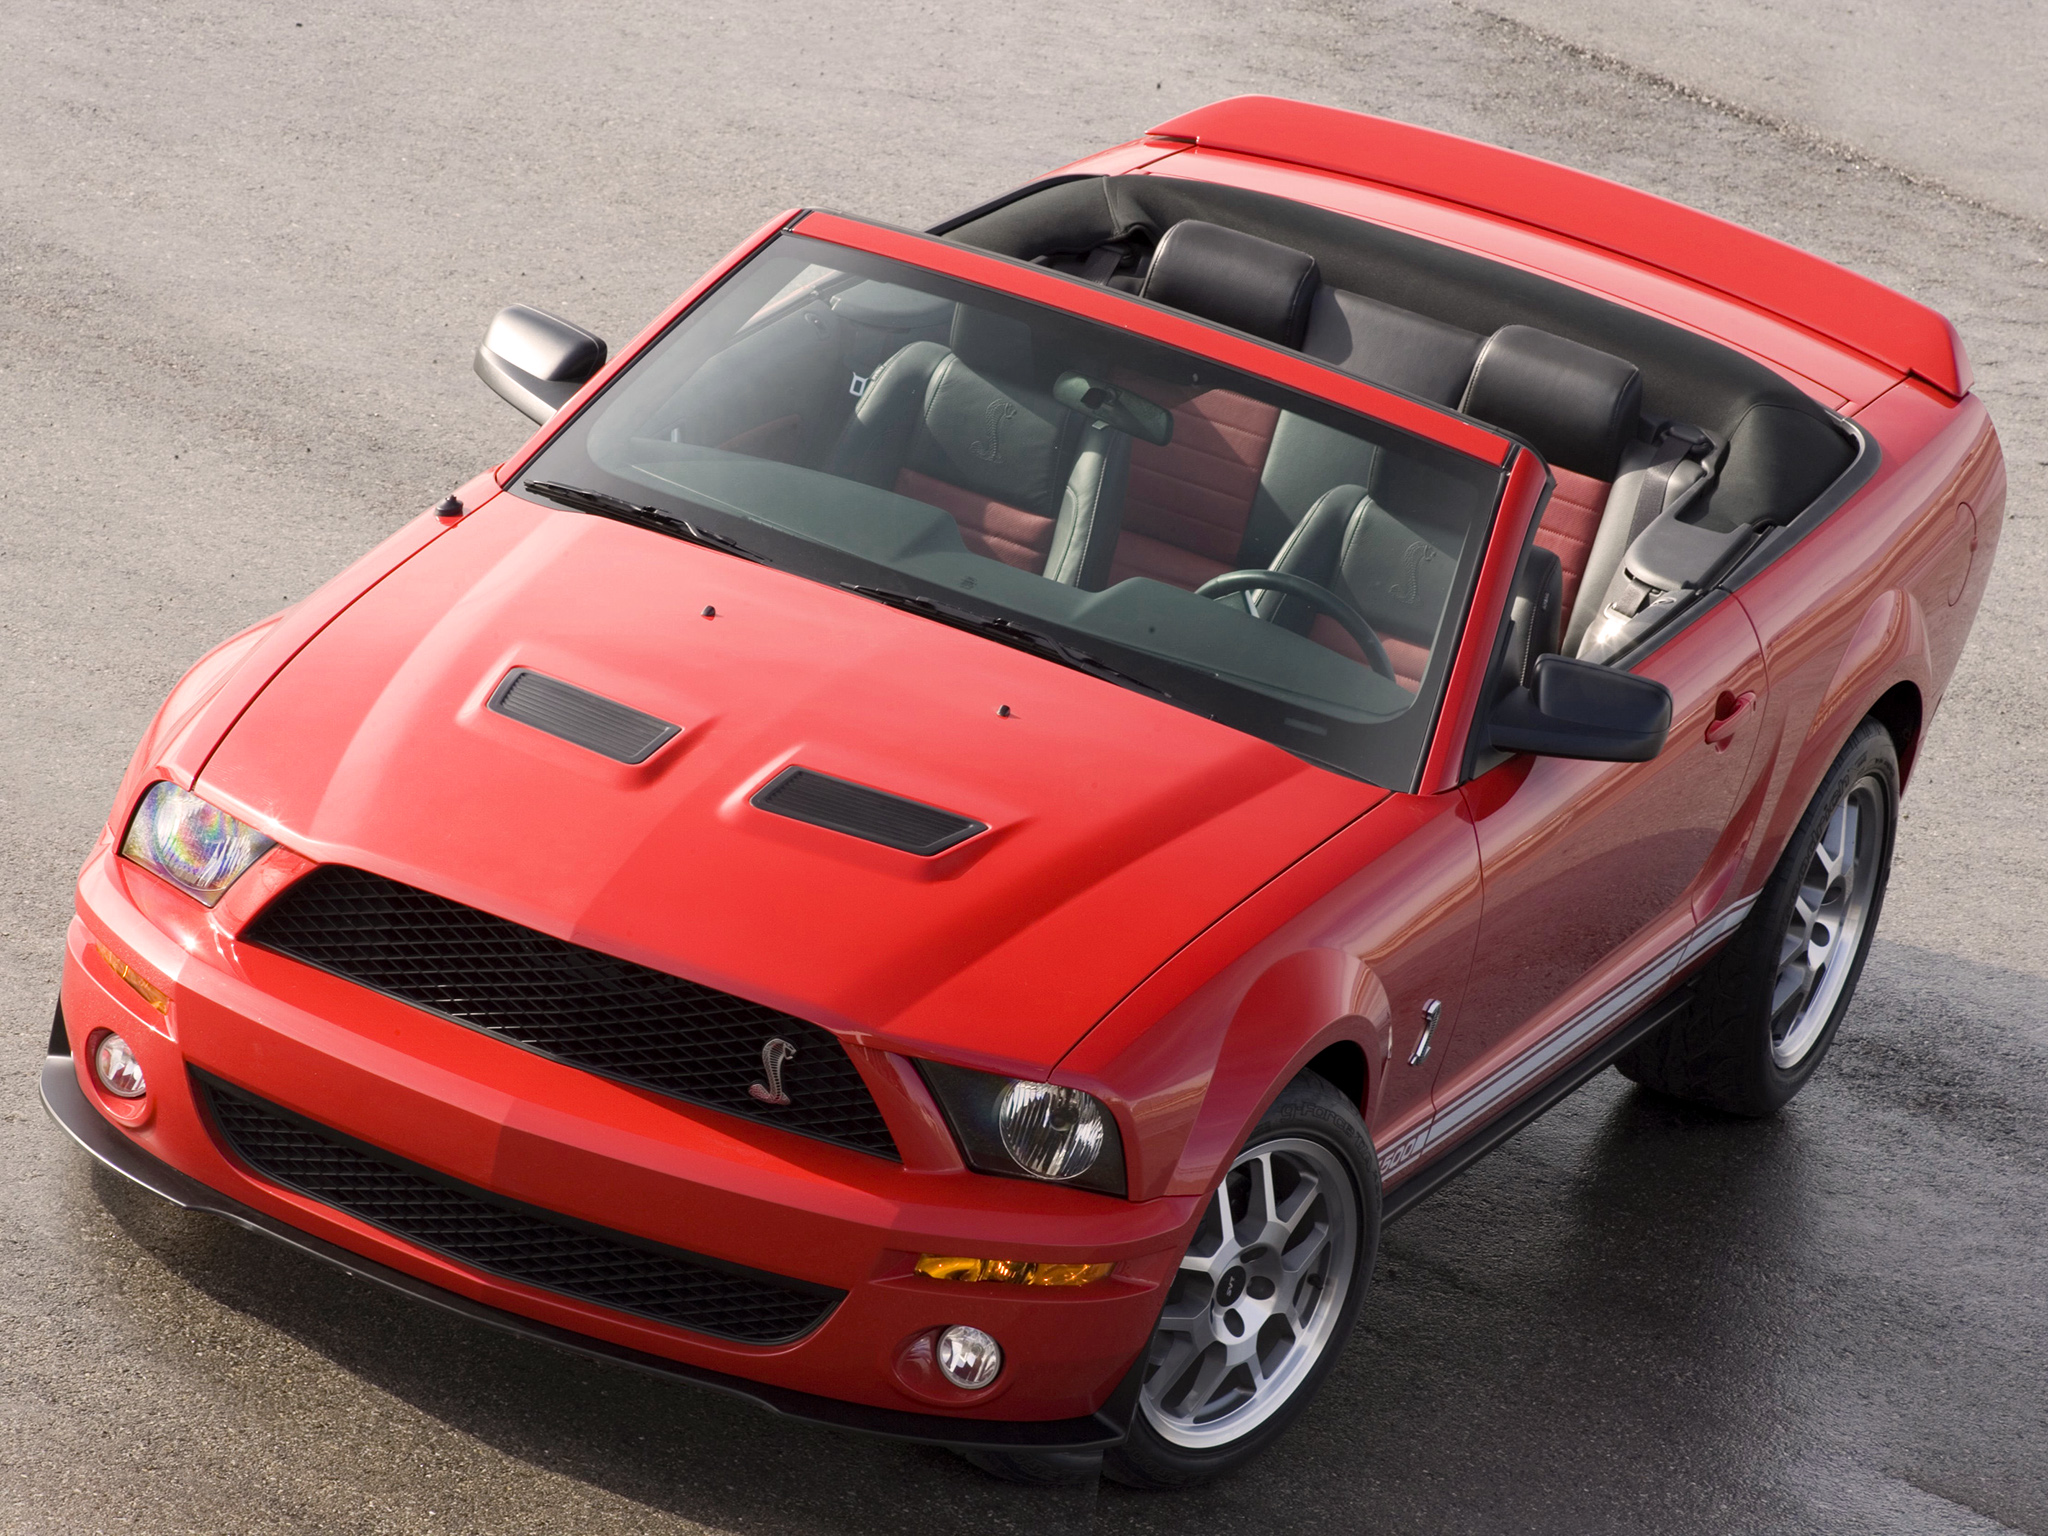 2006, Shelby, Gt500, Covertible, Ford, Mustang, Muscle Wallpaper